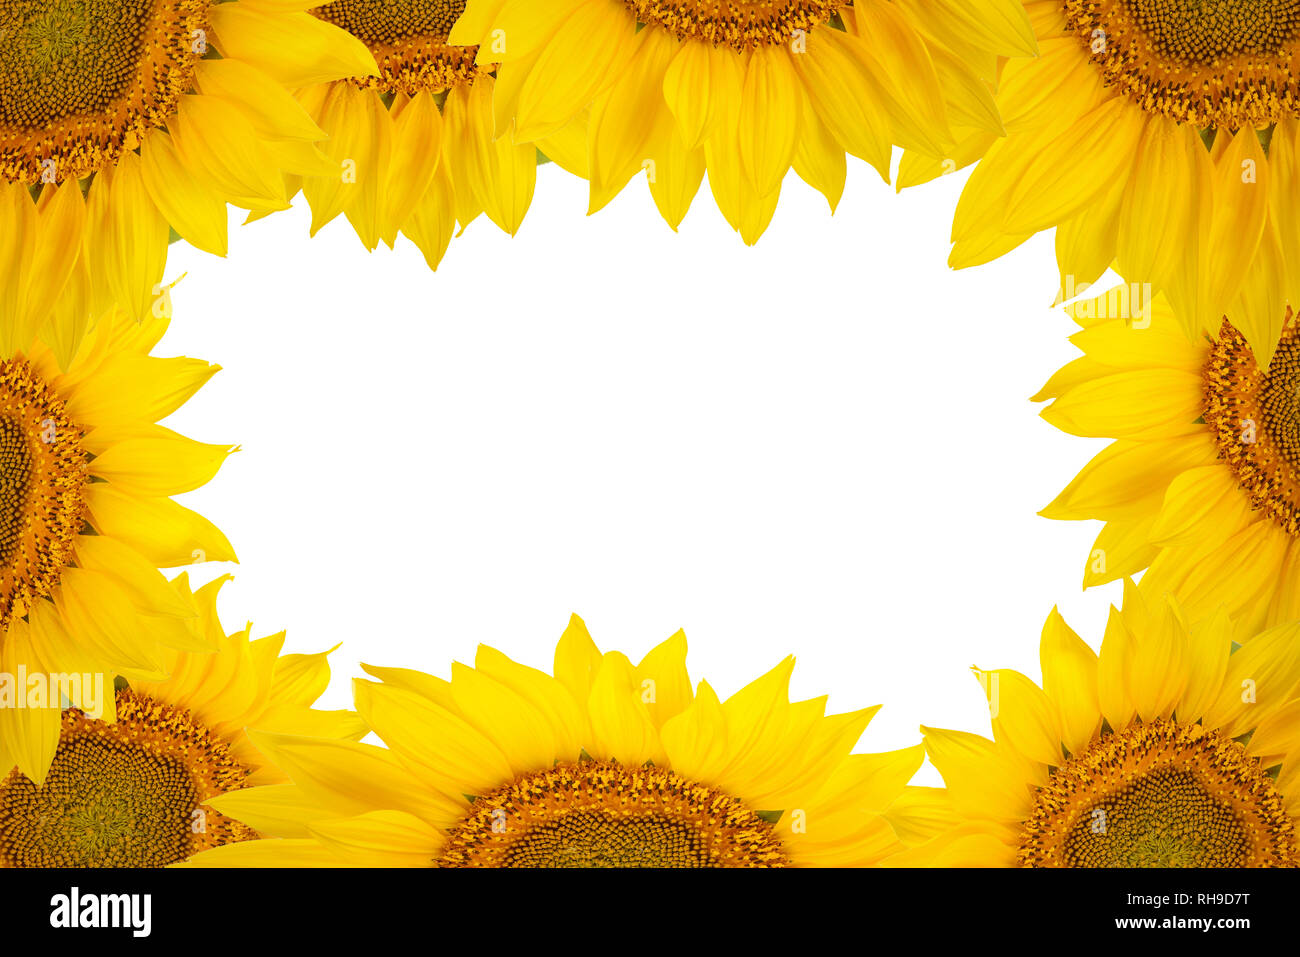 Frame of large sunflower flowers isolated on white background. Free space for text. Stock Photo